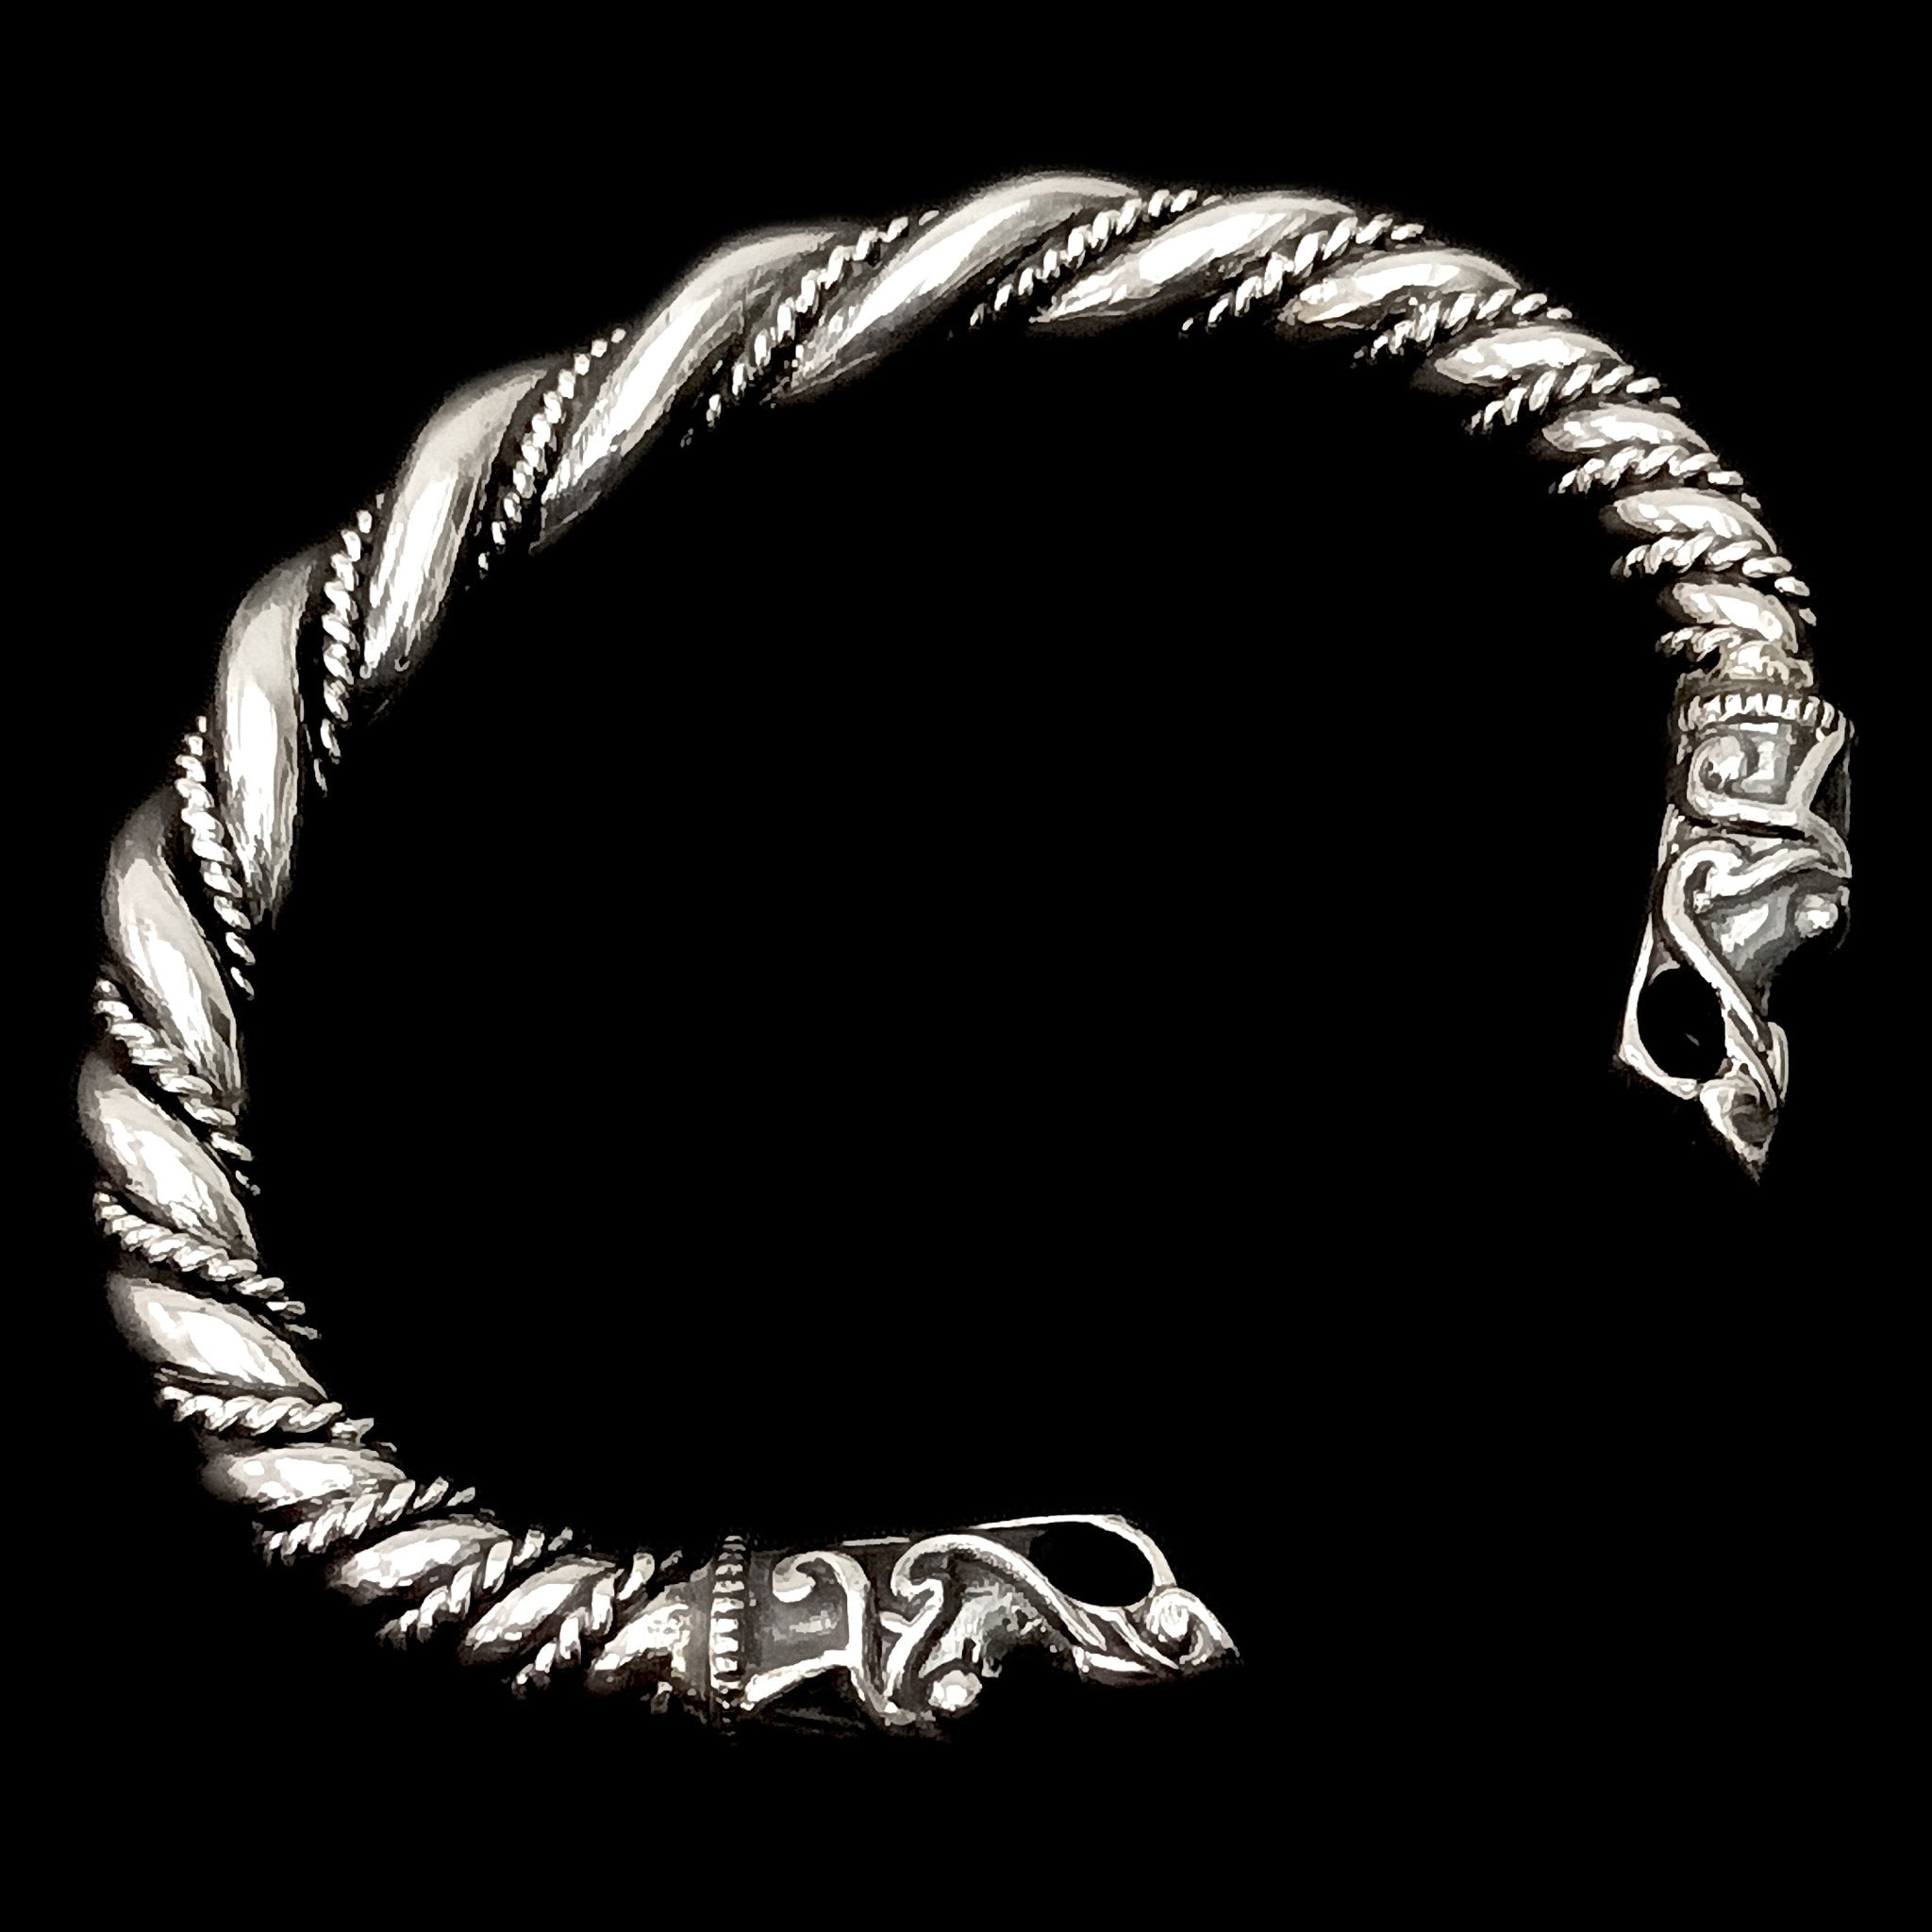 Thick Twisted Silver Arm Ring With Gotlandic Dragon Heads - Above Angle View